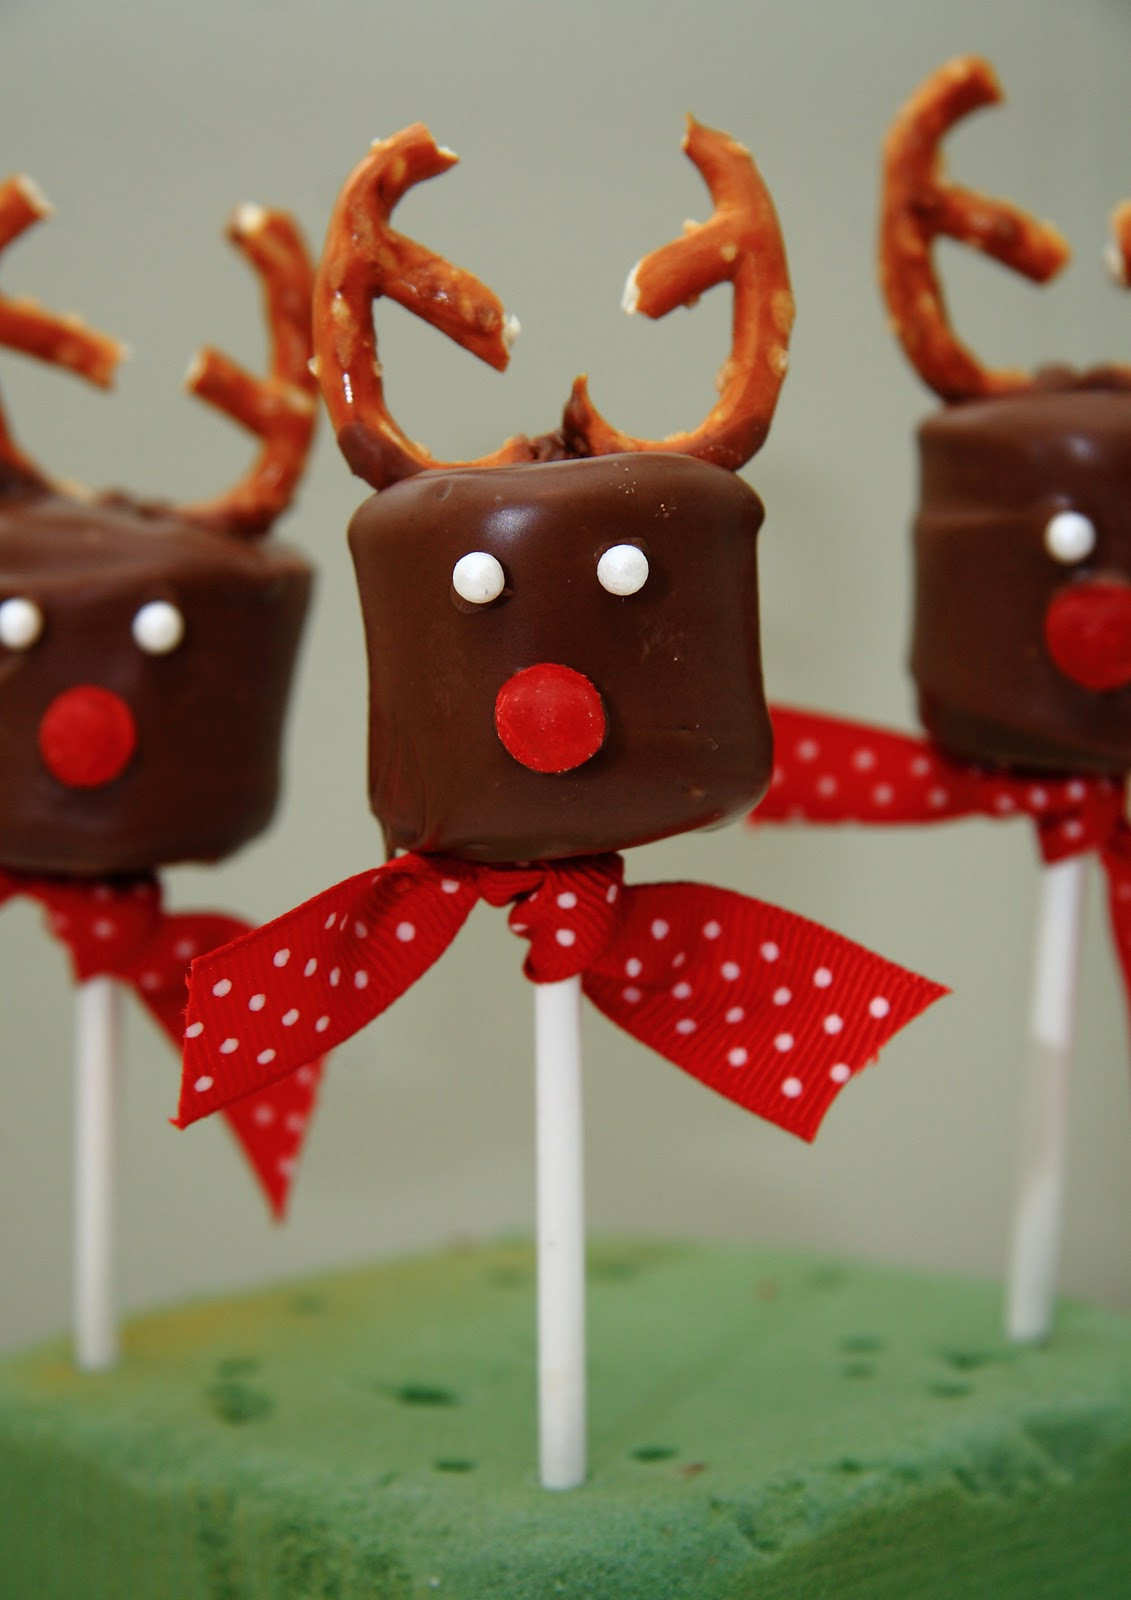 Ideas For Christmas Party
 21 Amazing Christmas Party Ideas for Kids